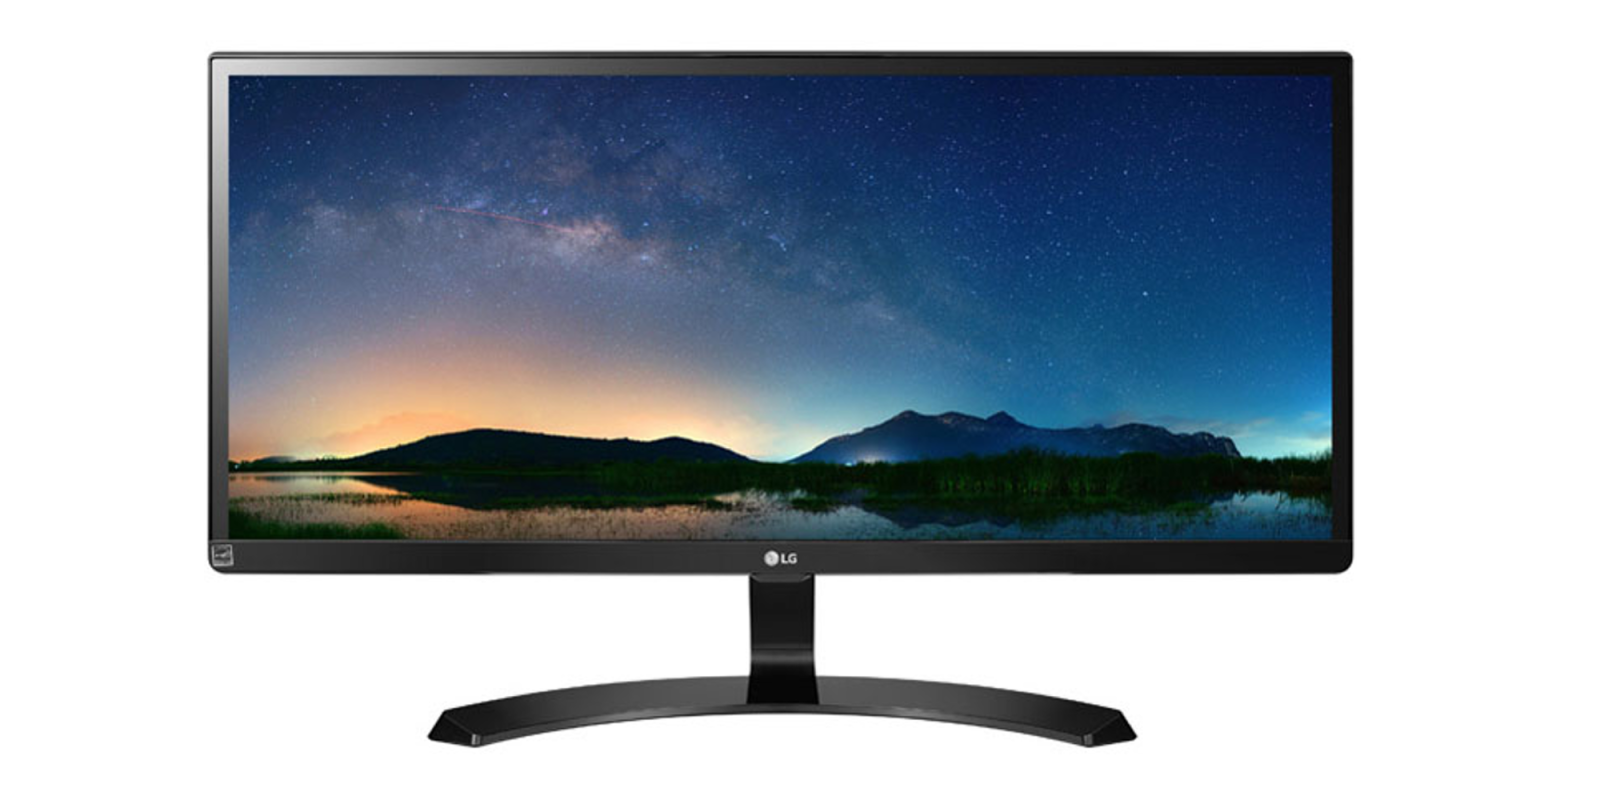 LG's 29-inch UltraWide Monitor gets a $65 discount to $184 shipped